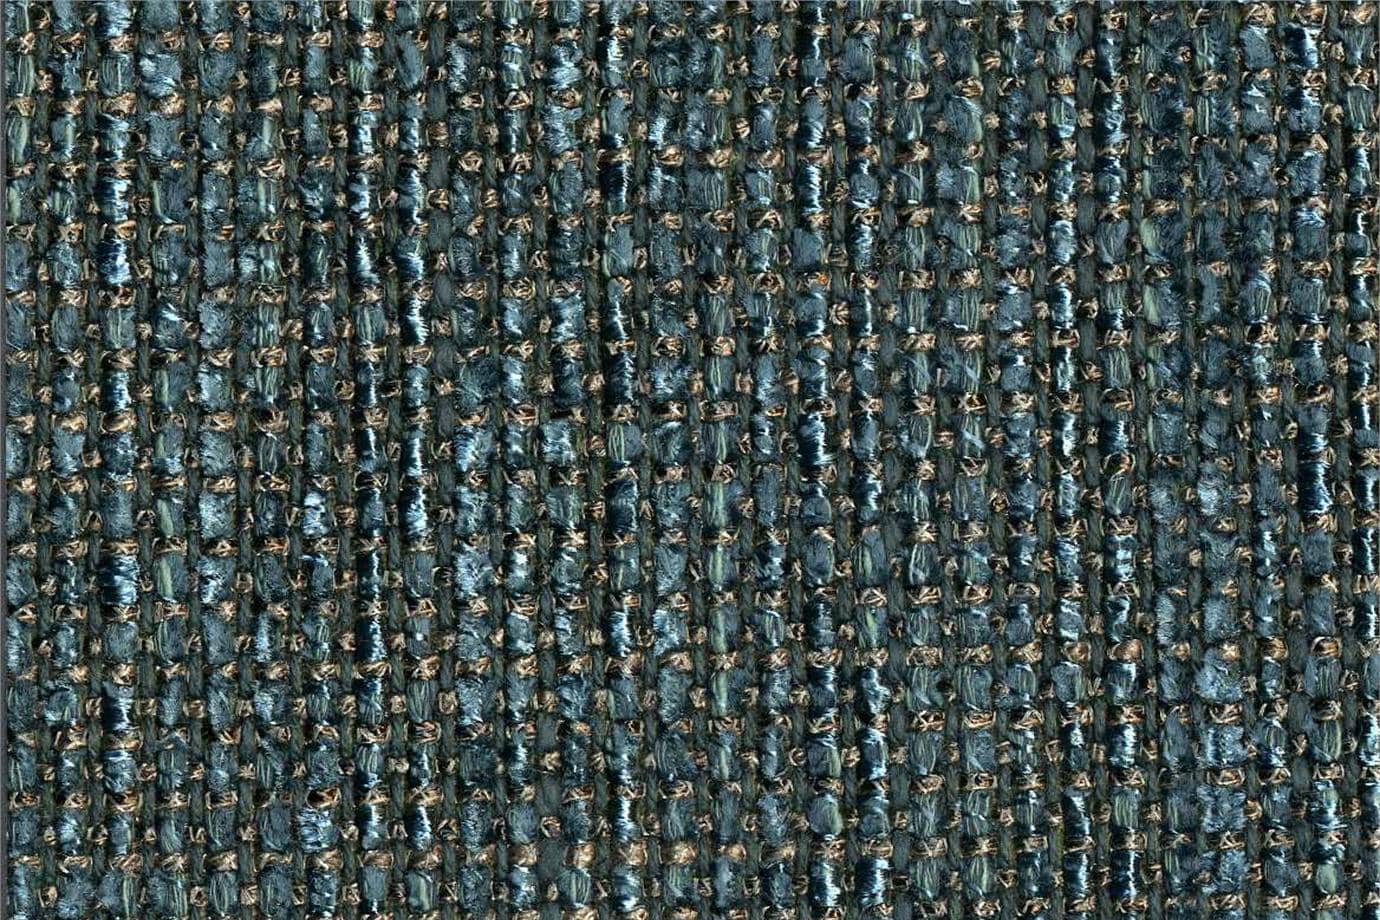 AC113 FENICE 014 Volpe home decoration fabric